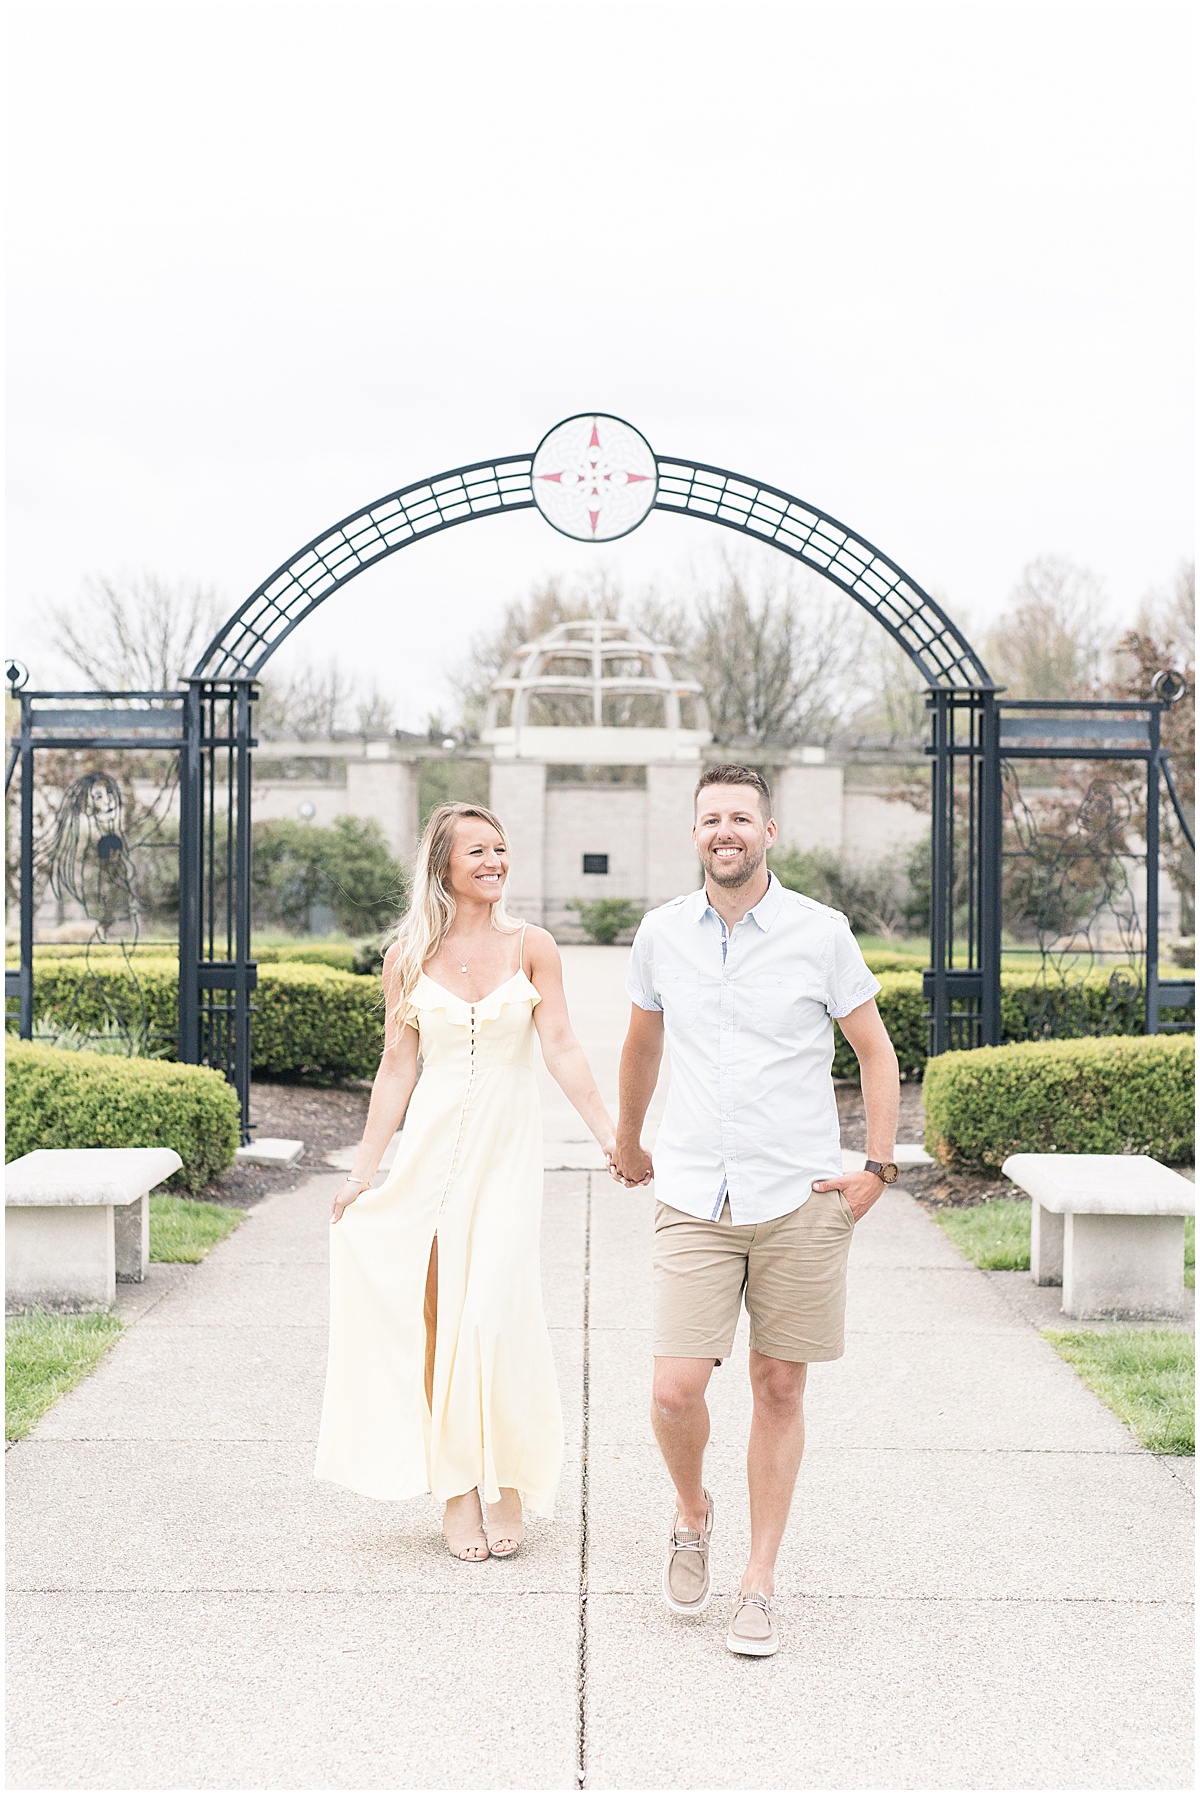 Coxhall Gardens Engagement Photos in Carmel, Indiana